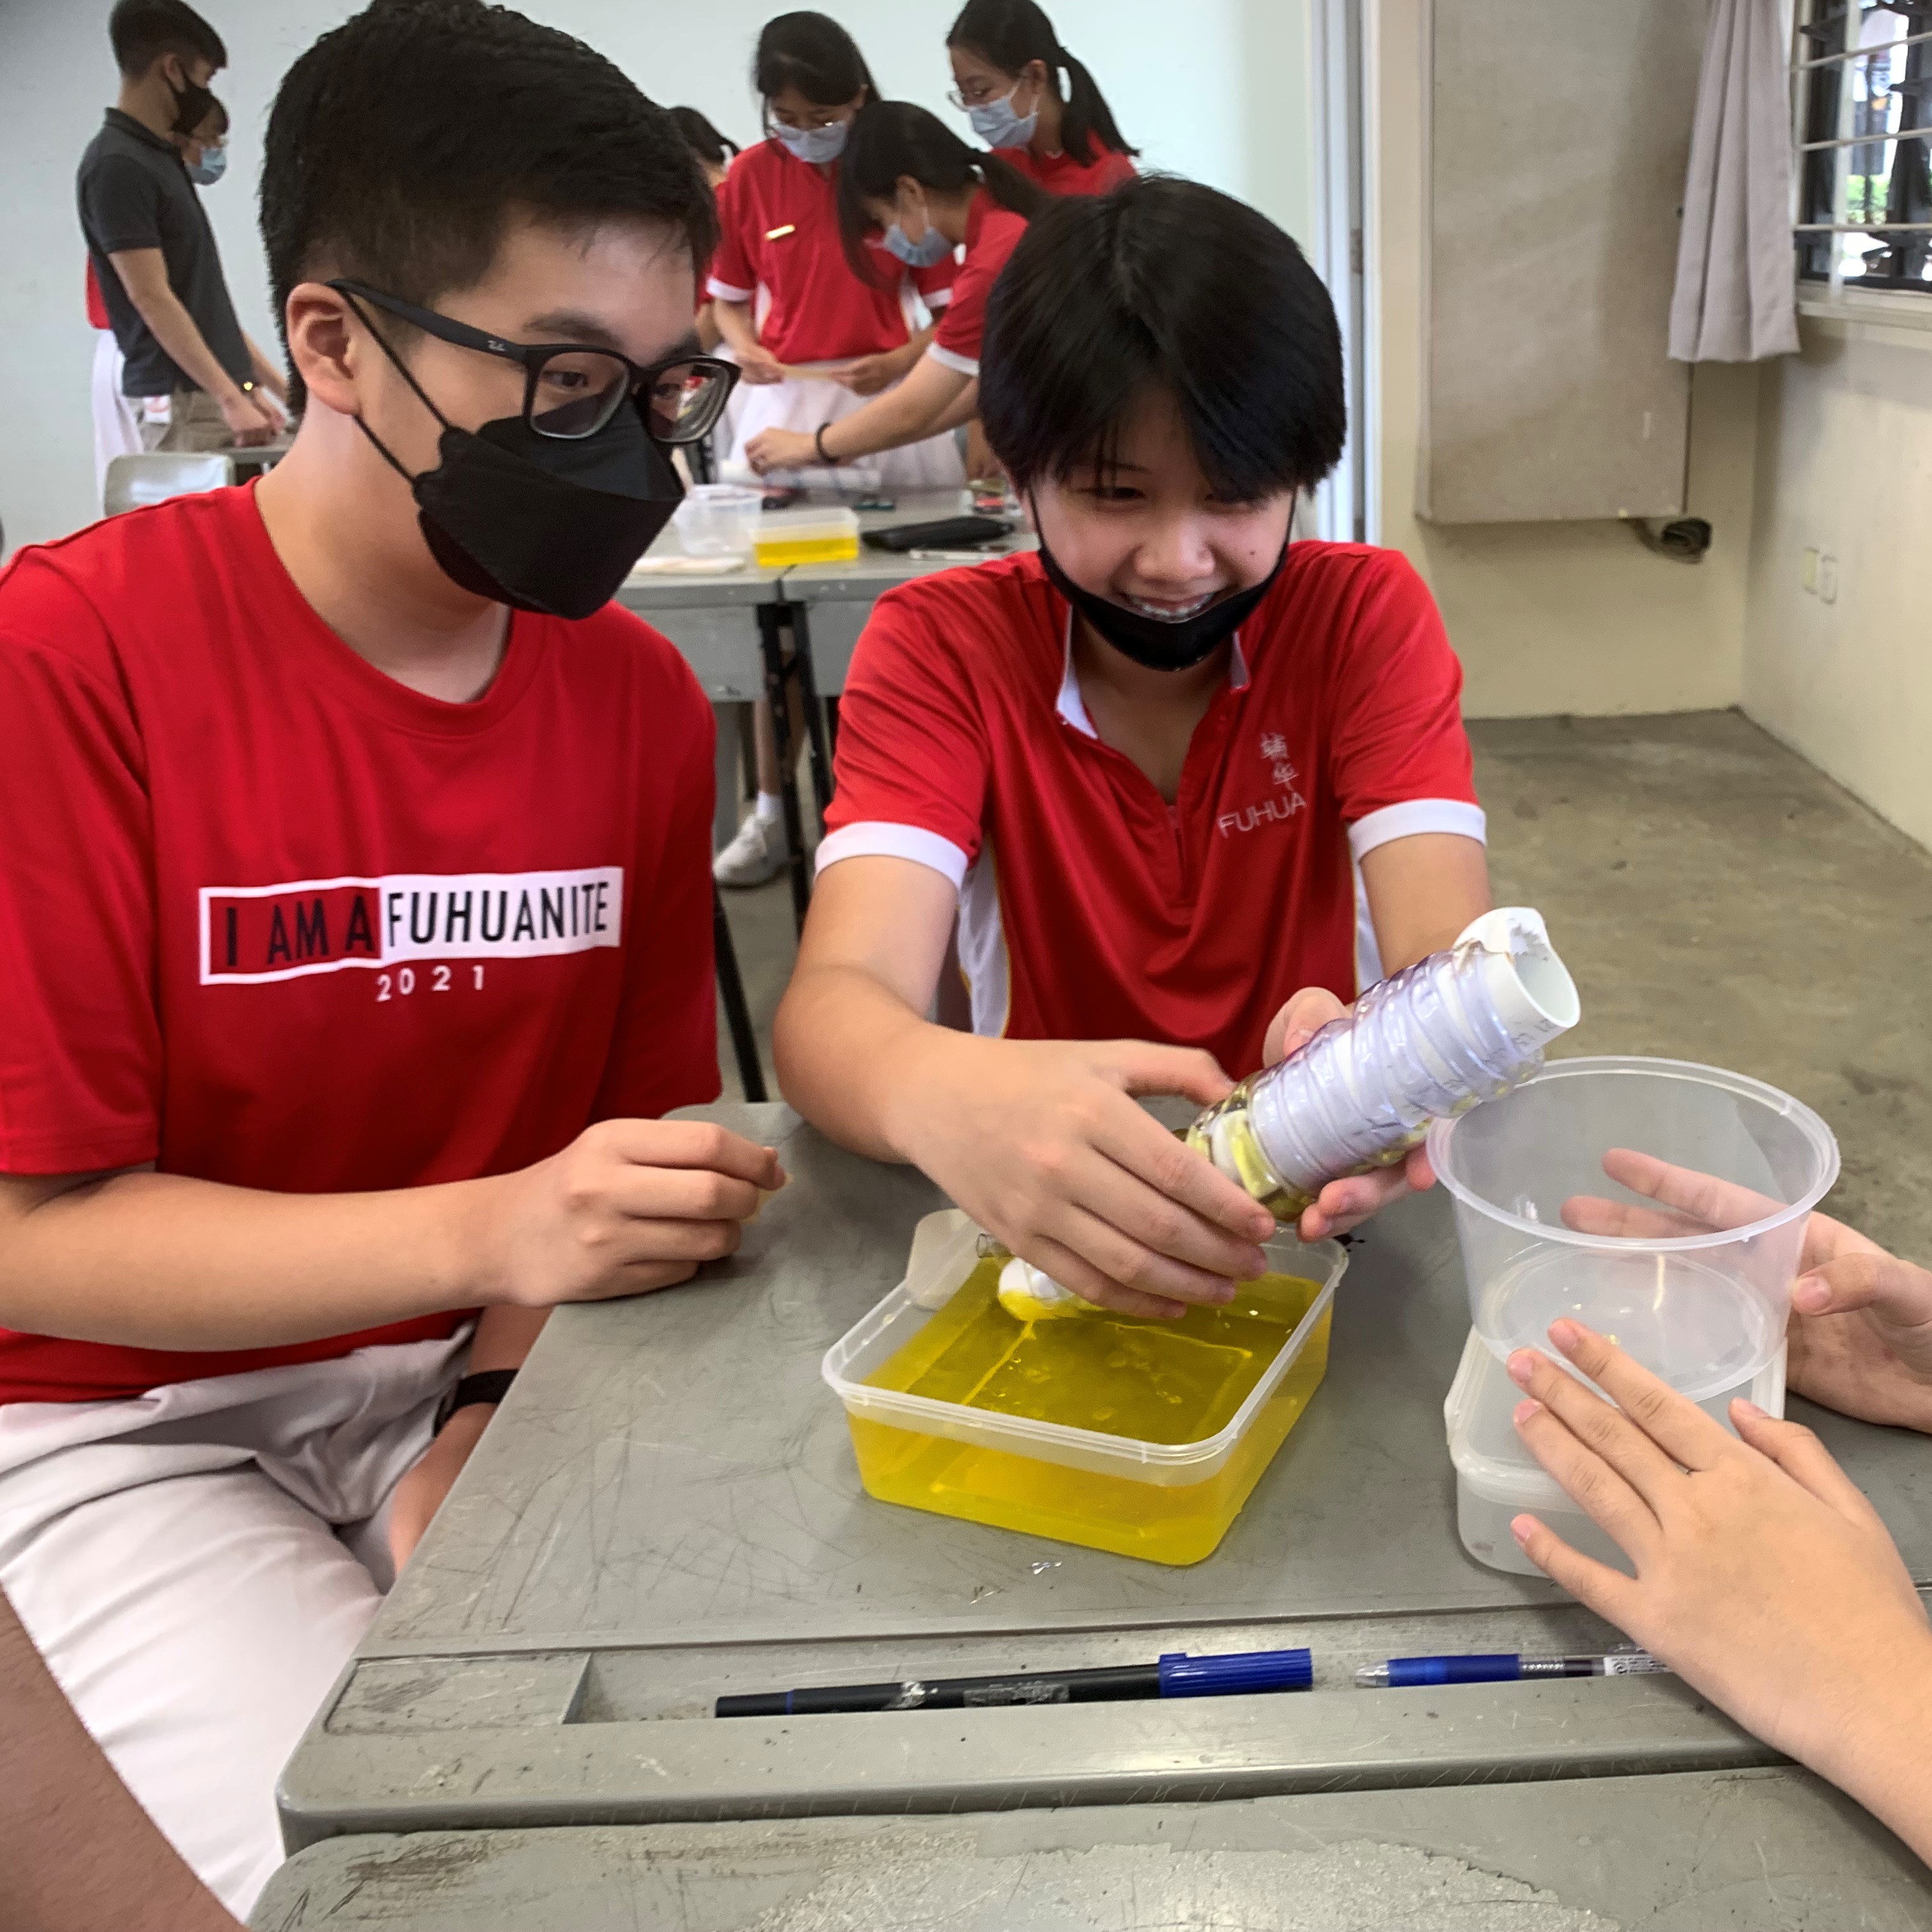 A fun-filled day to learn science in Singapore